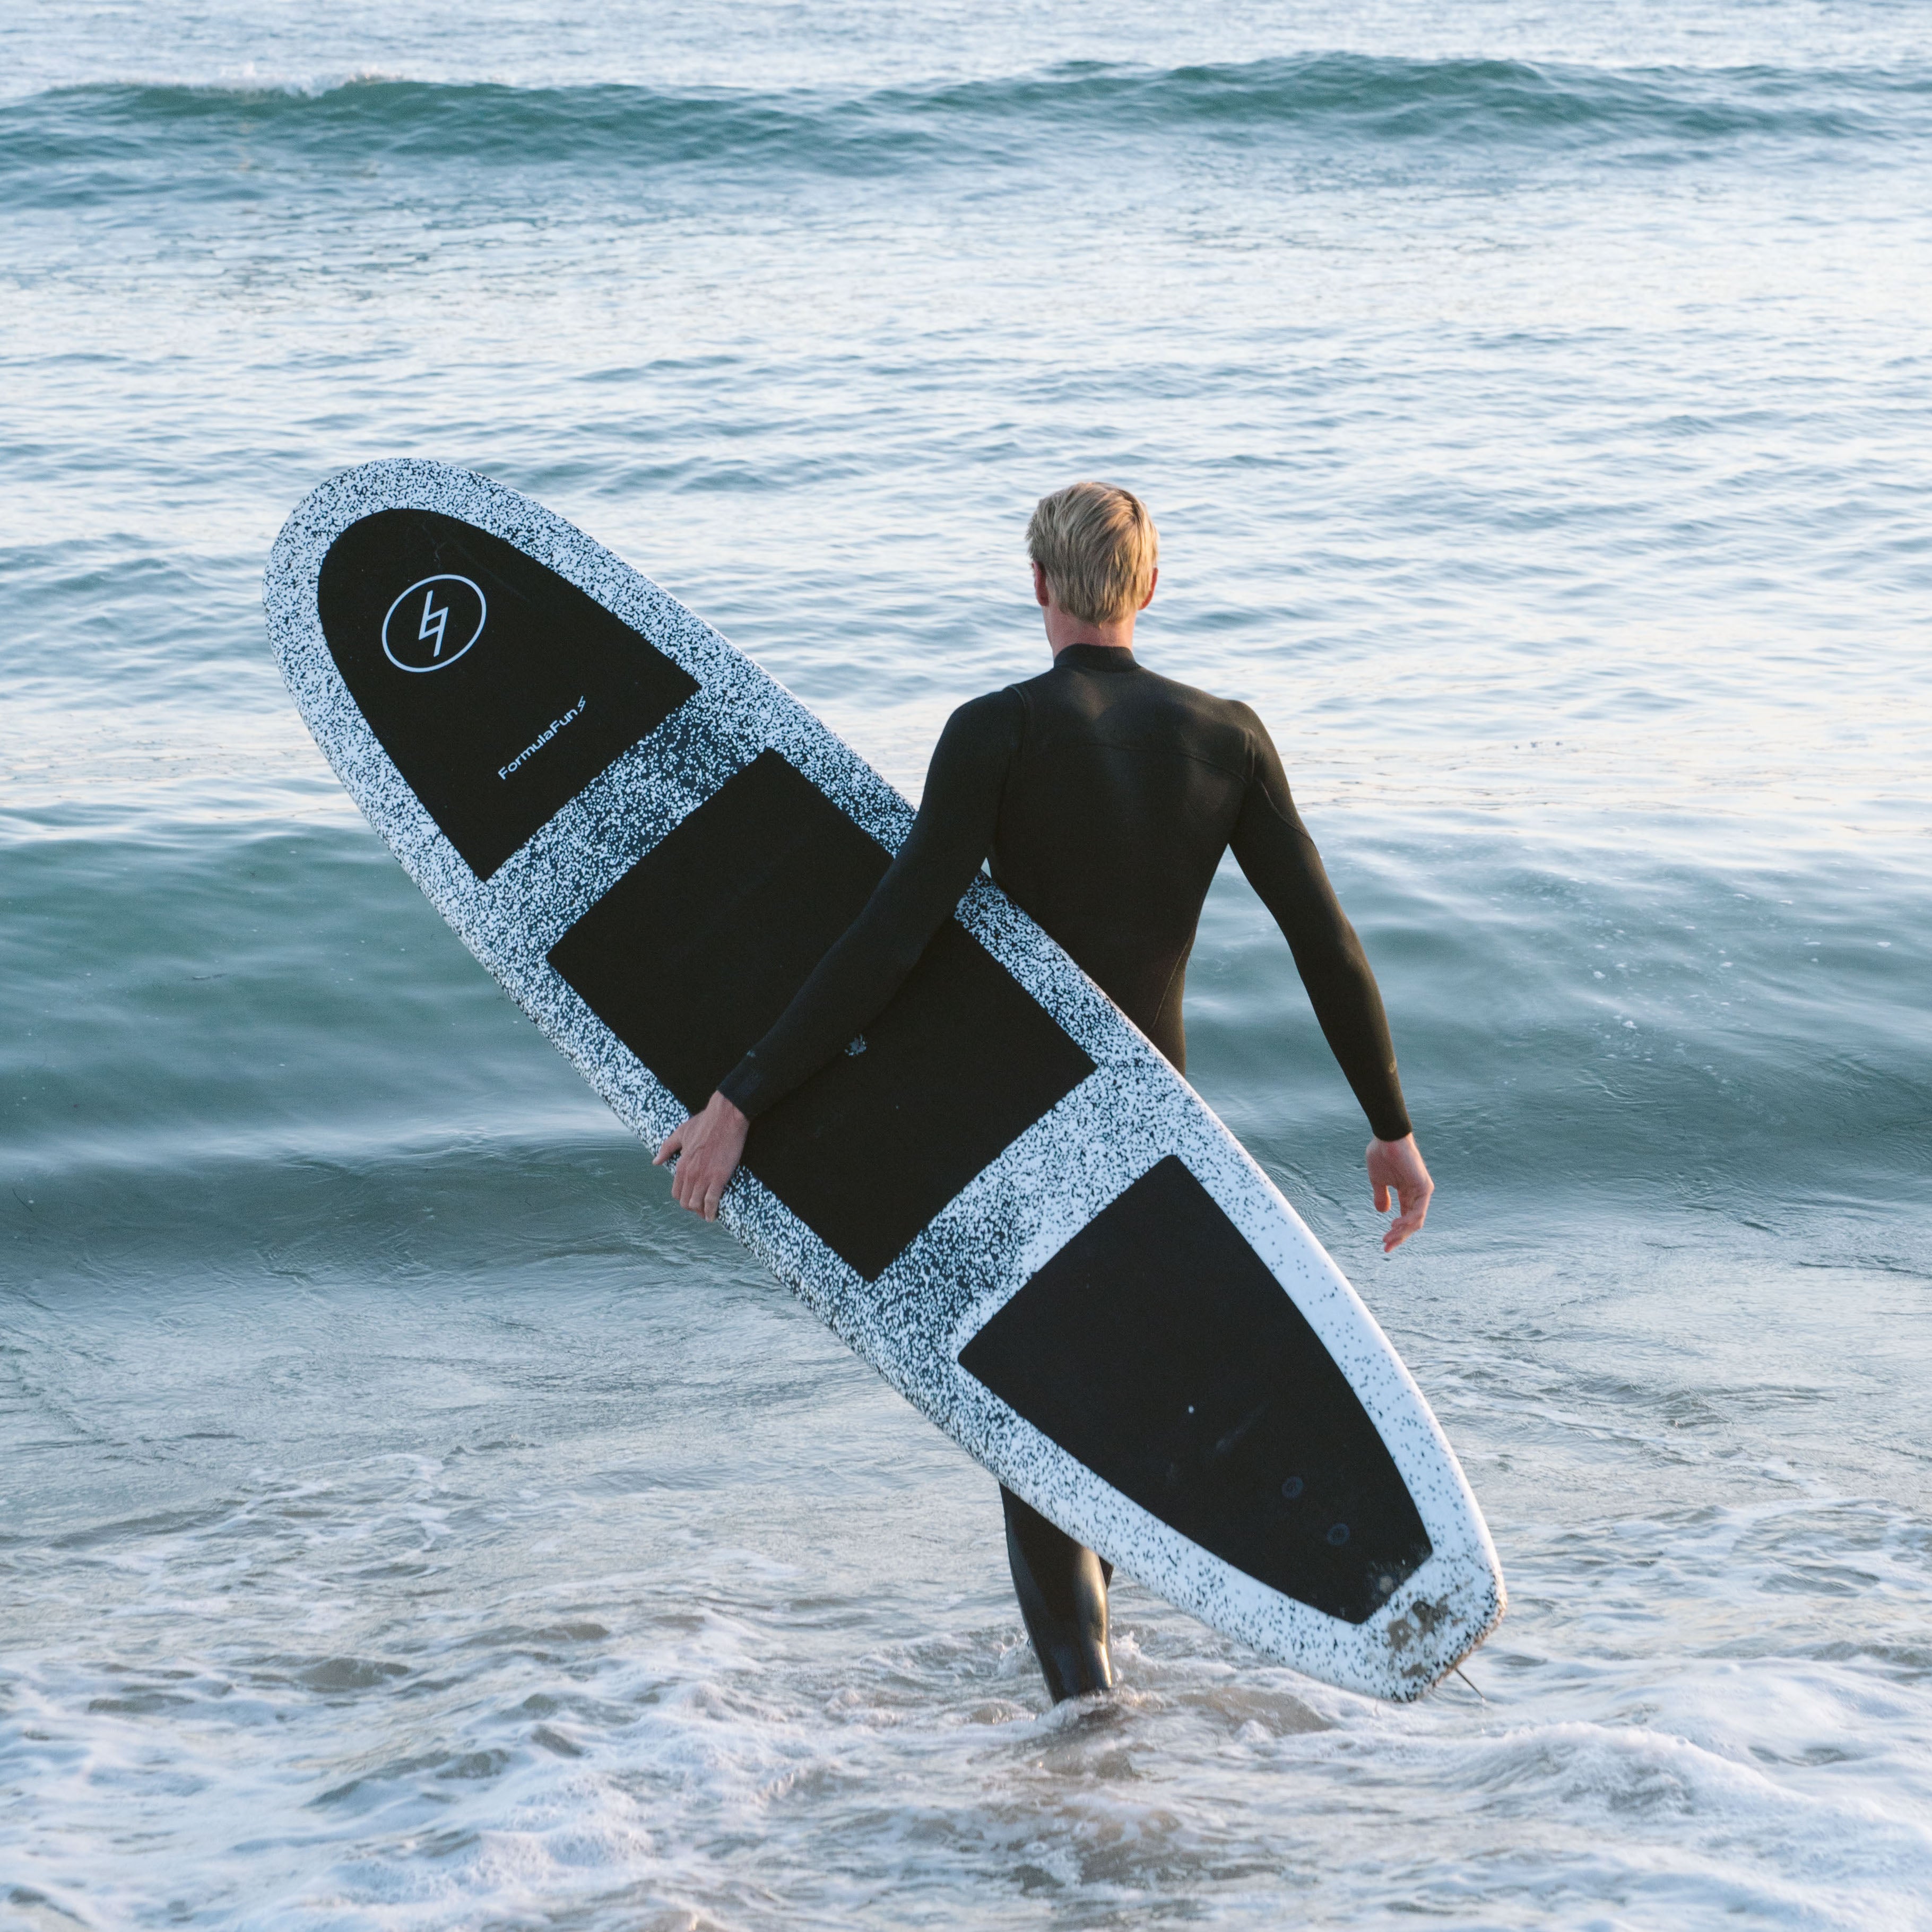 Man in a wetsuit entering the ocean with a speckled Formula Fun Foamies surfboard